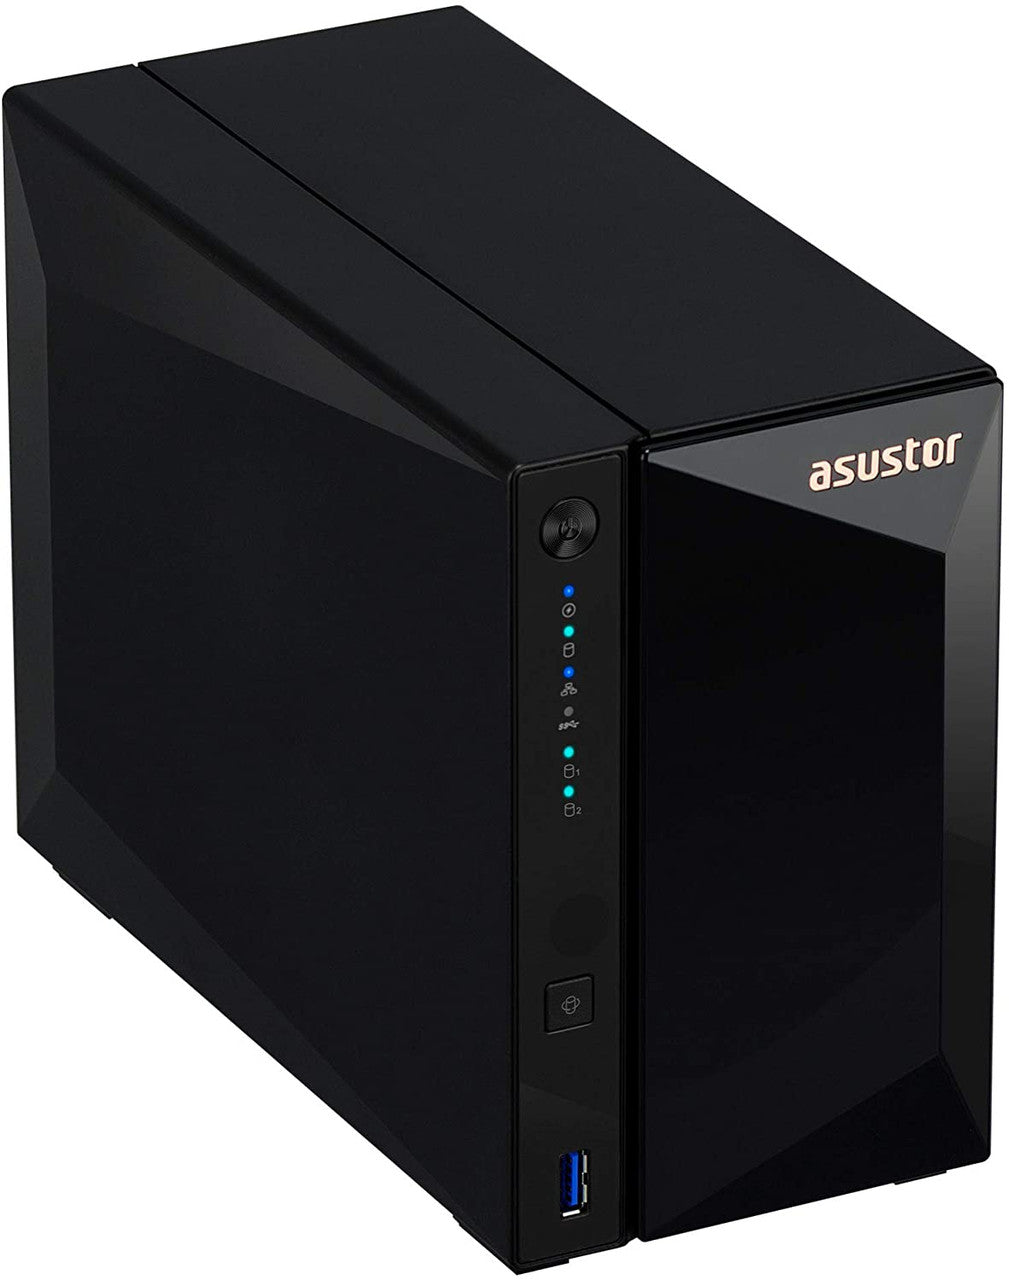 Asustor AS3302T 2-Bay Drivestor 2 PRO NAS with 2GB RAM and 4TB (2x2TB) Western Digital RED PRO Drives Fully Assembled and Tested